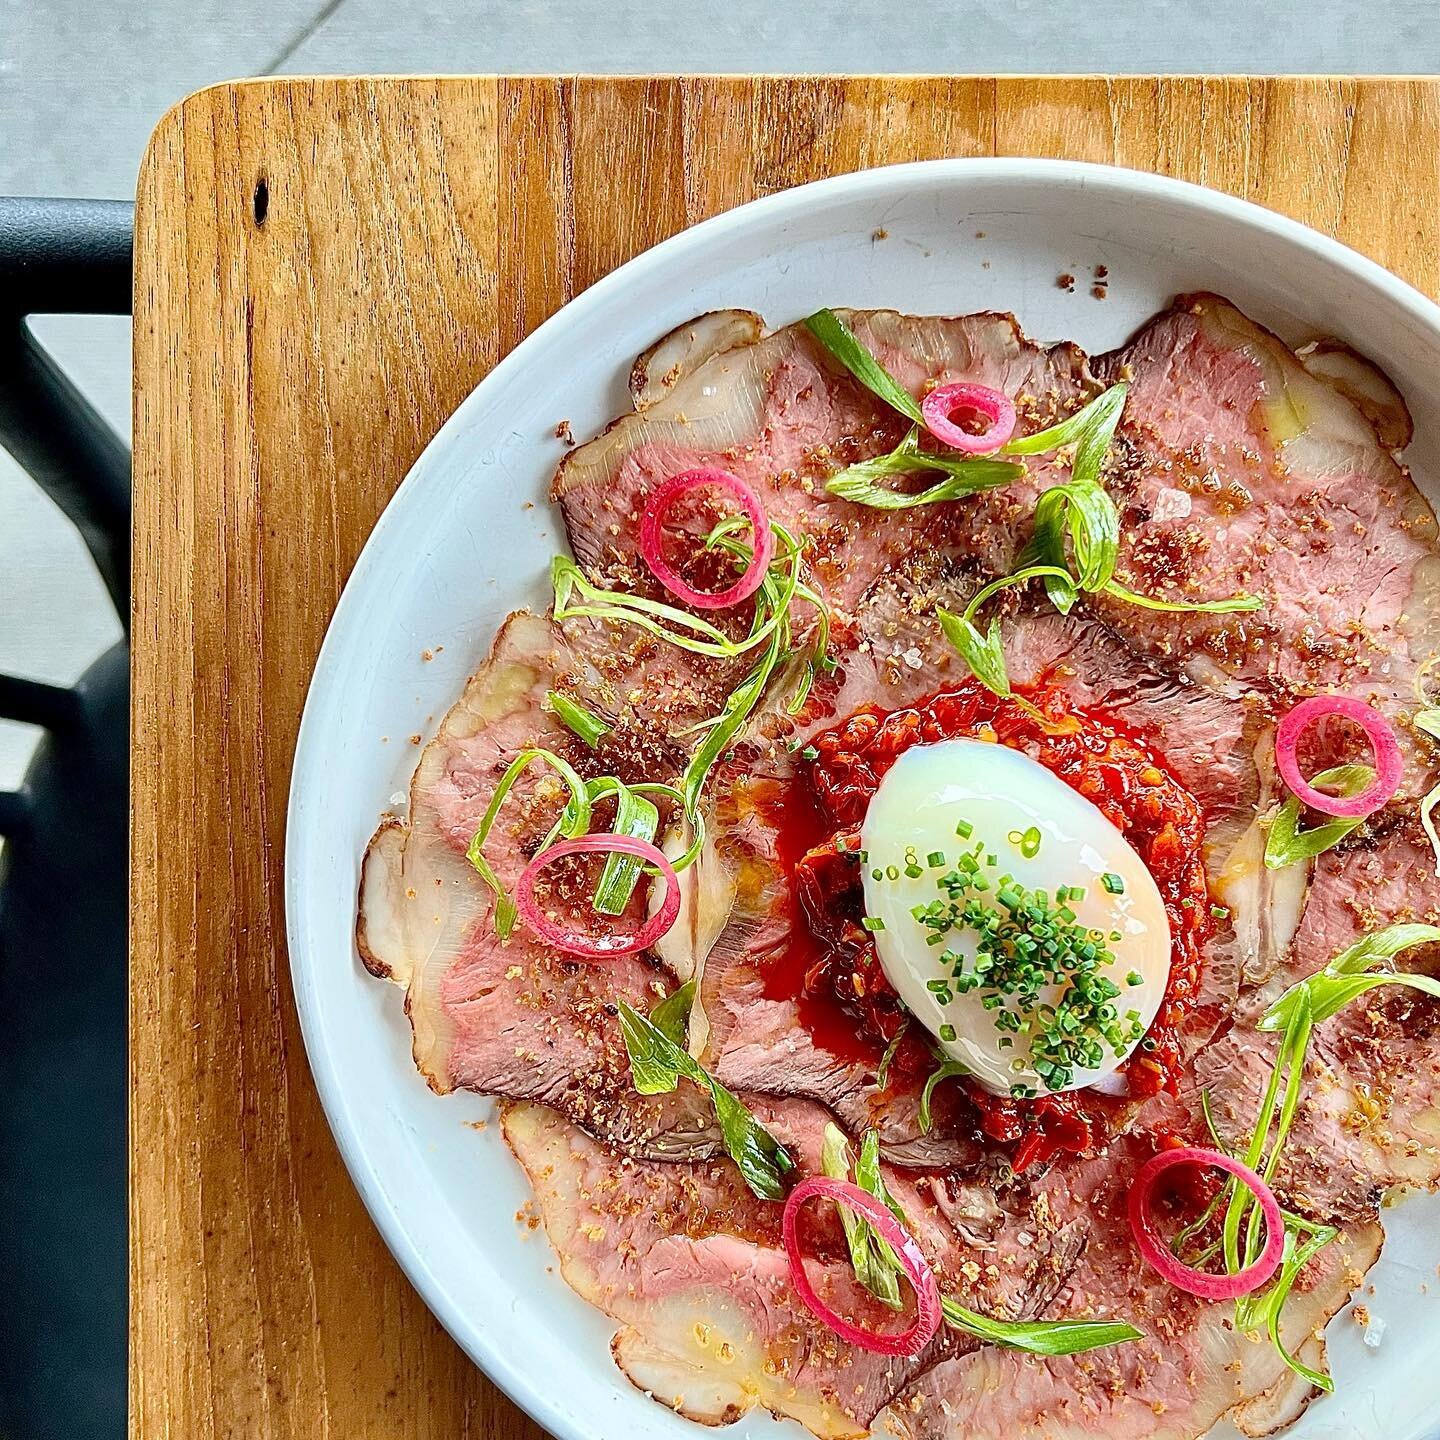 Appetizer special @foundationsocialeatery : NY strip carpaccio, calabrian chili paste, poached egg, pickled pearl onion, scallion